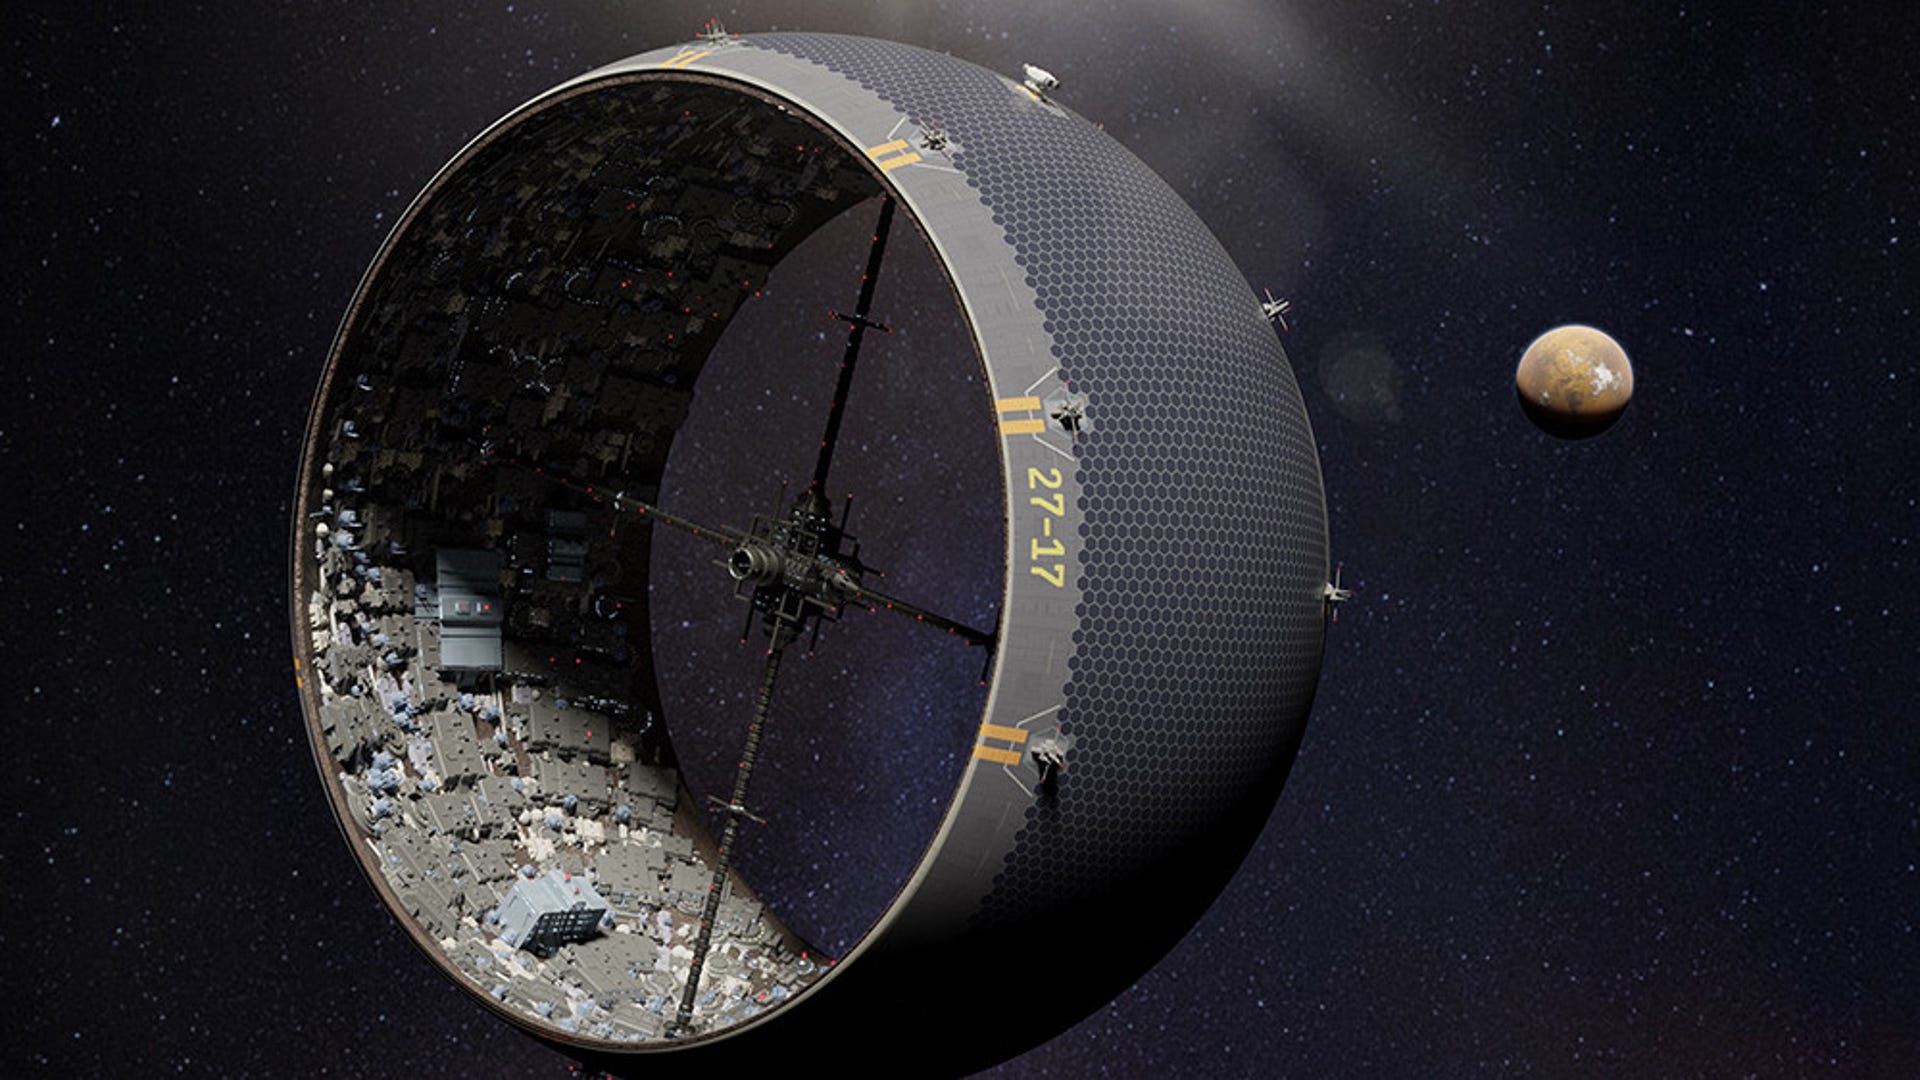 Illustrations shows an open cylindrical city inside a mesh-covered asteroid with a planet in the distance.